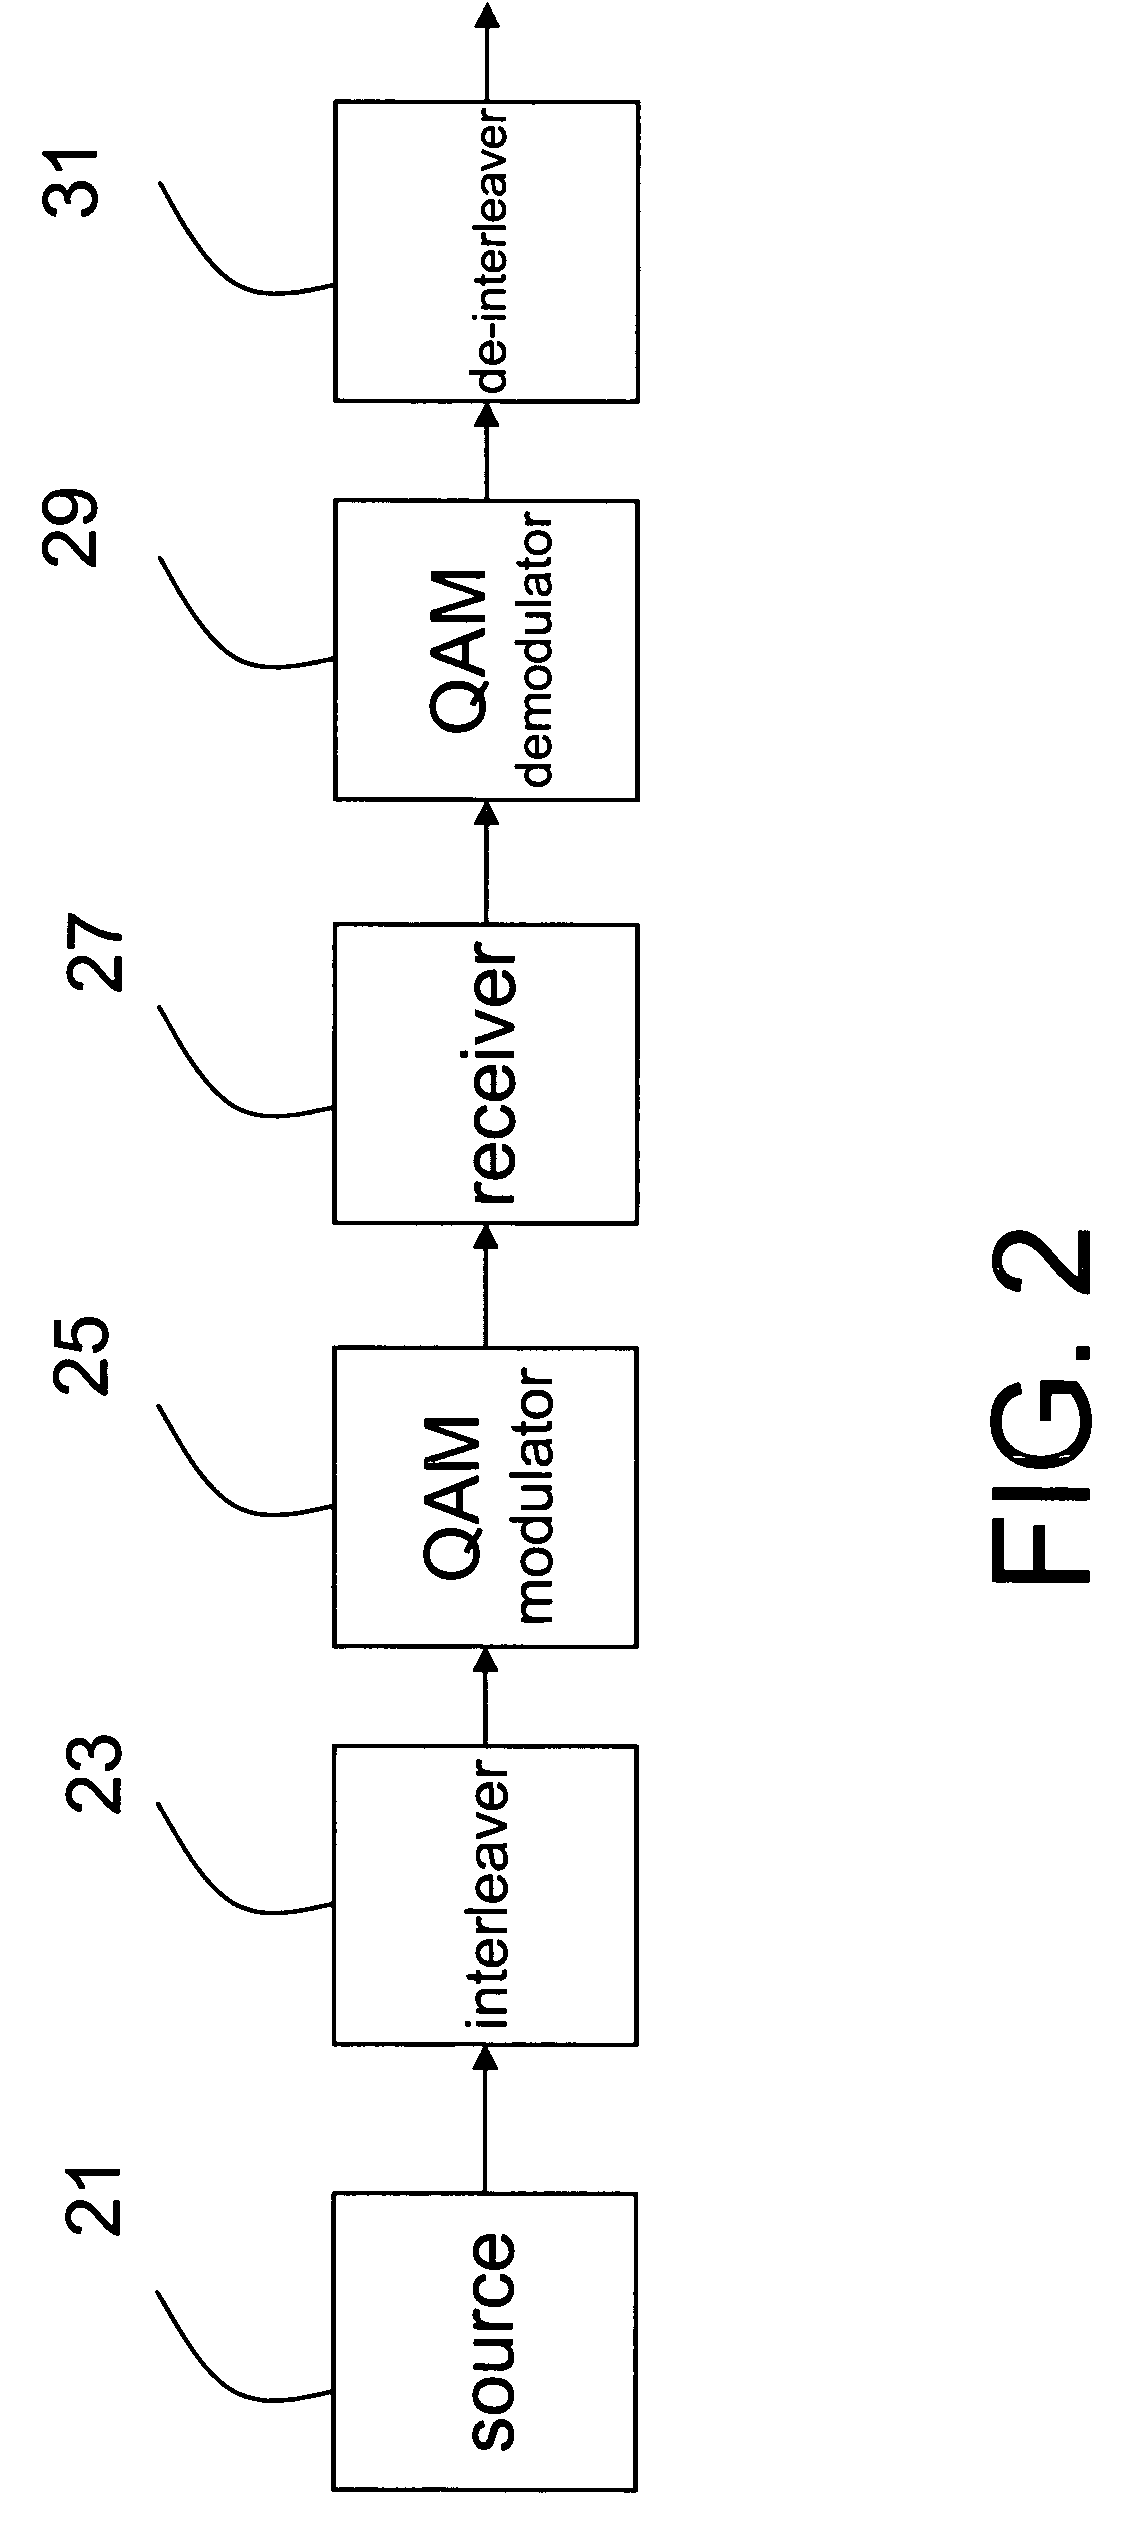 QAM mapping and bit labeling or bit-interleaved coded modulation